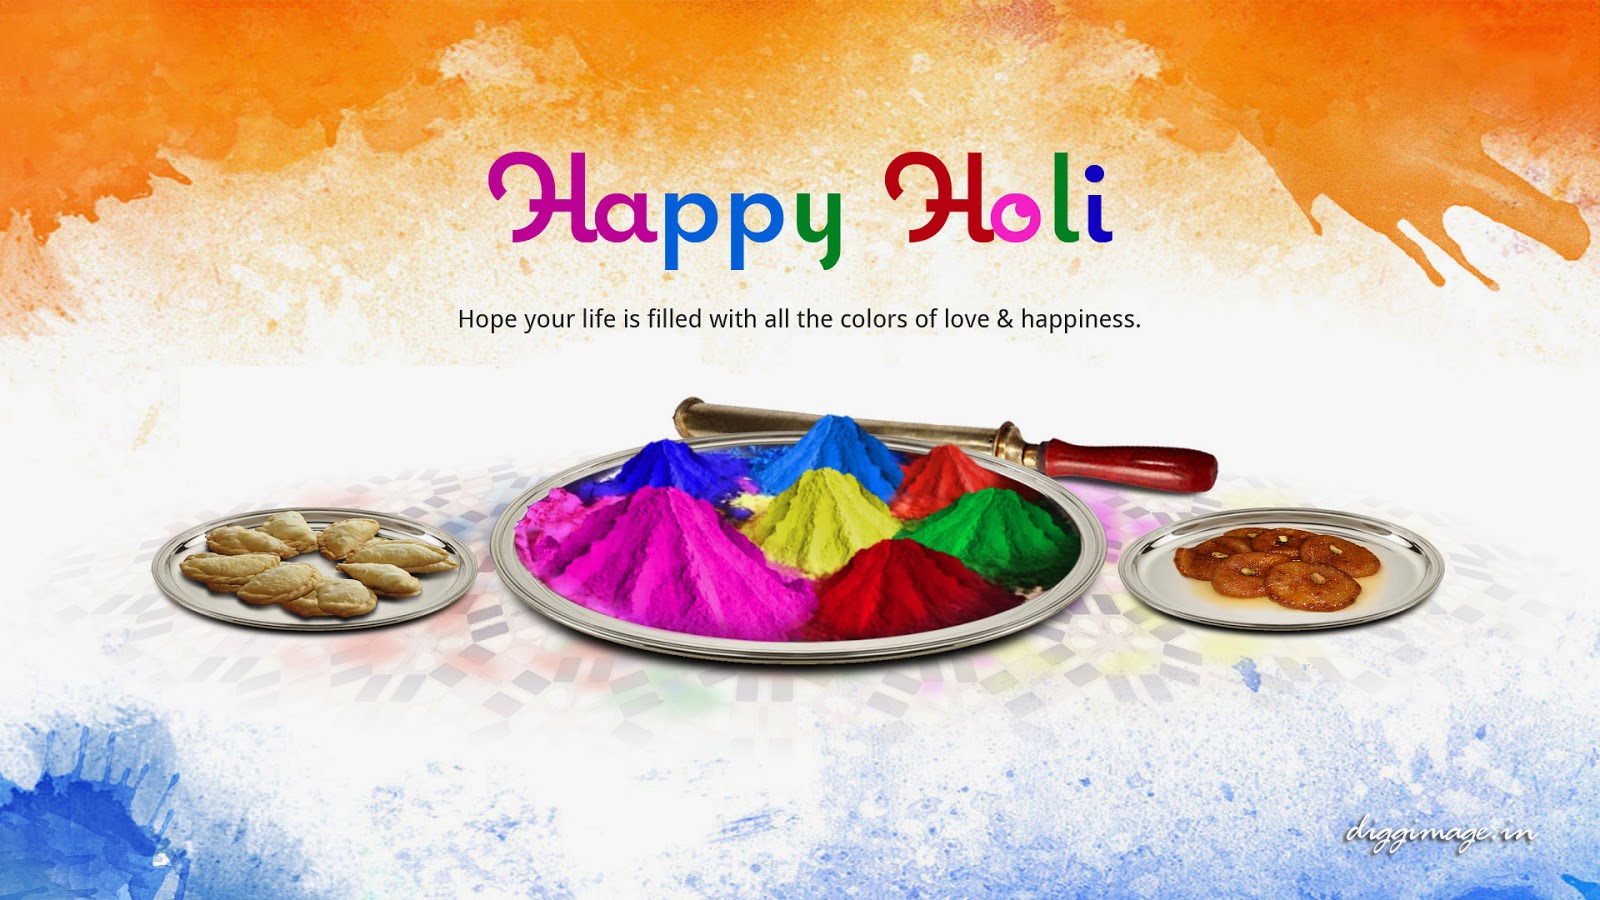 Happy Holi 2016, Holi Wishes, Happy Holi Messages, Holi Quotes, Holi greetings Cards, Images, Holi Songs, Holi HD Wallpapers, Pictures, Holi sms.,Happy Holi 2014 Greetings & Holi 2014 Celebrations quotes : Holi 2014 Greetings, Messages & Quotes : Holi